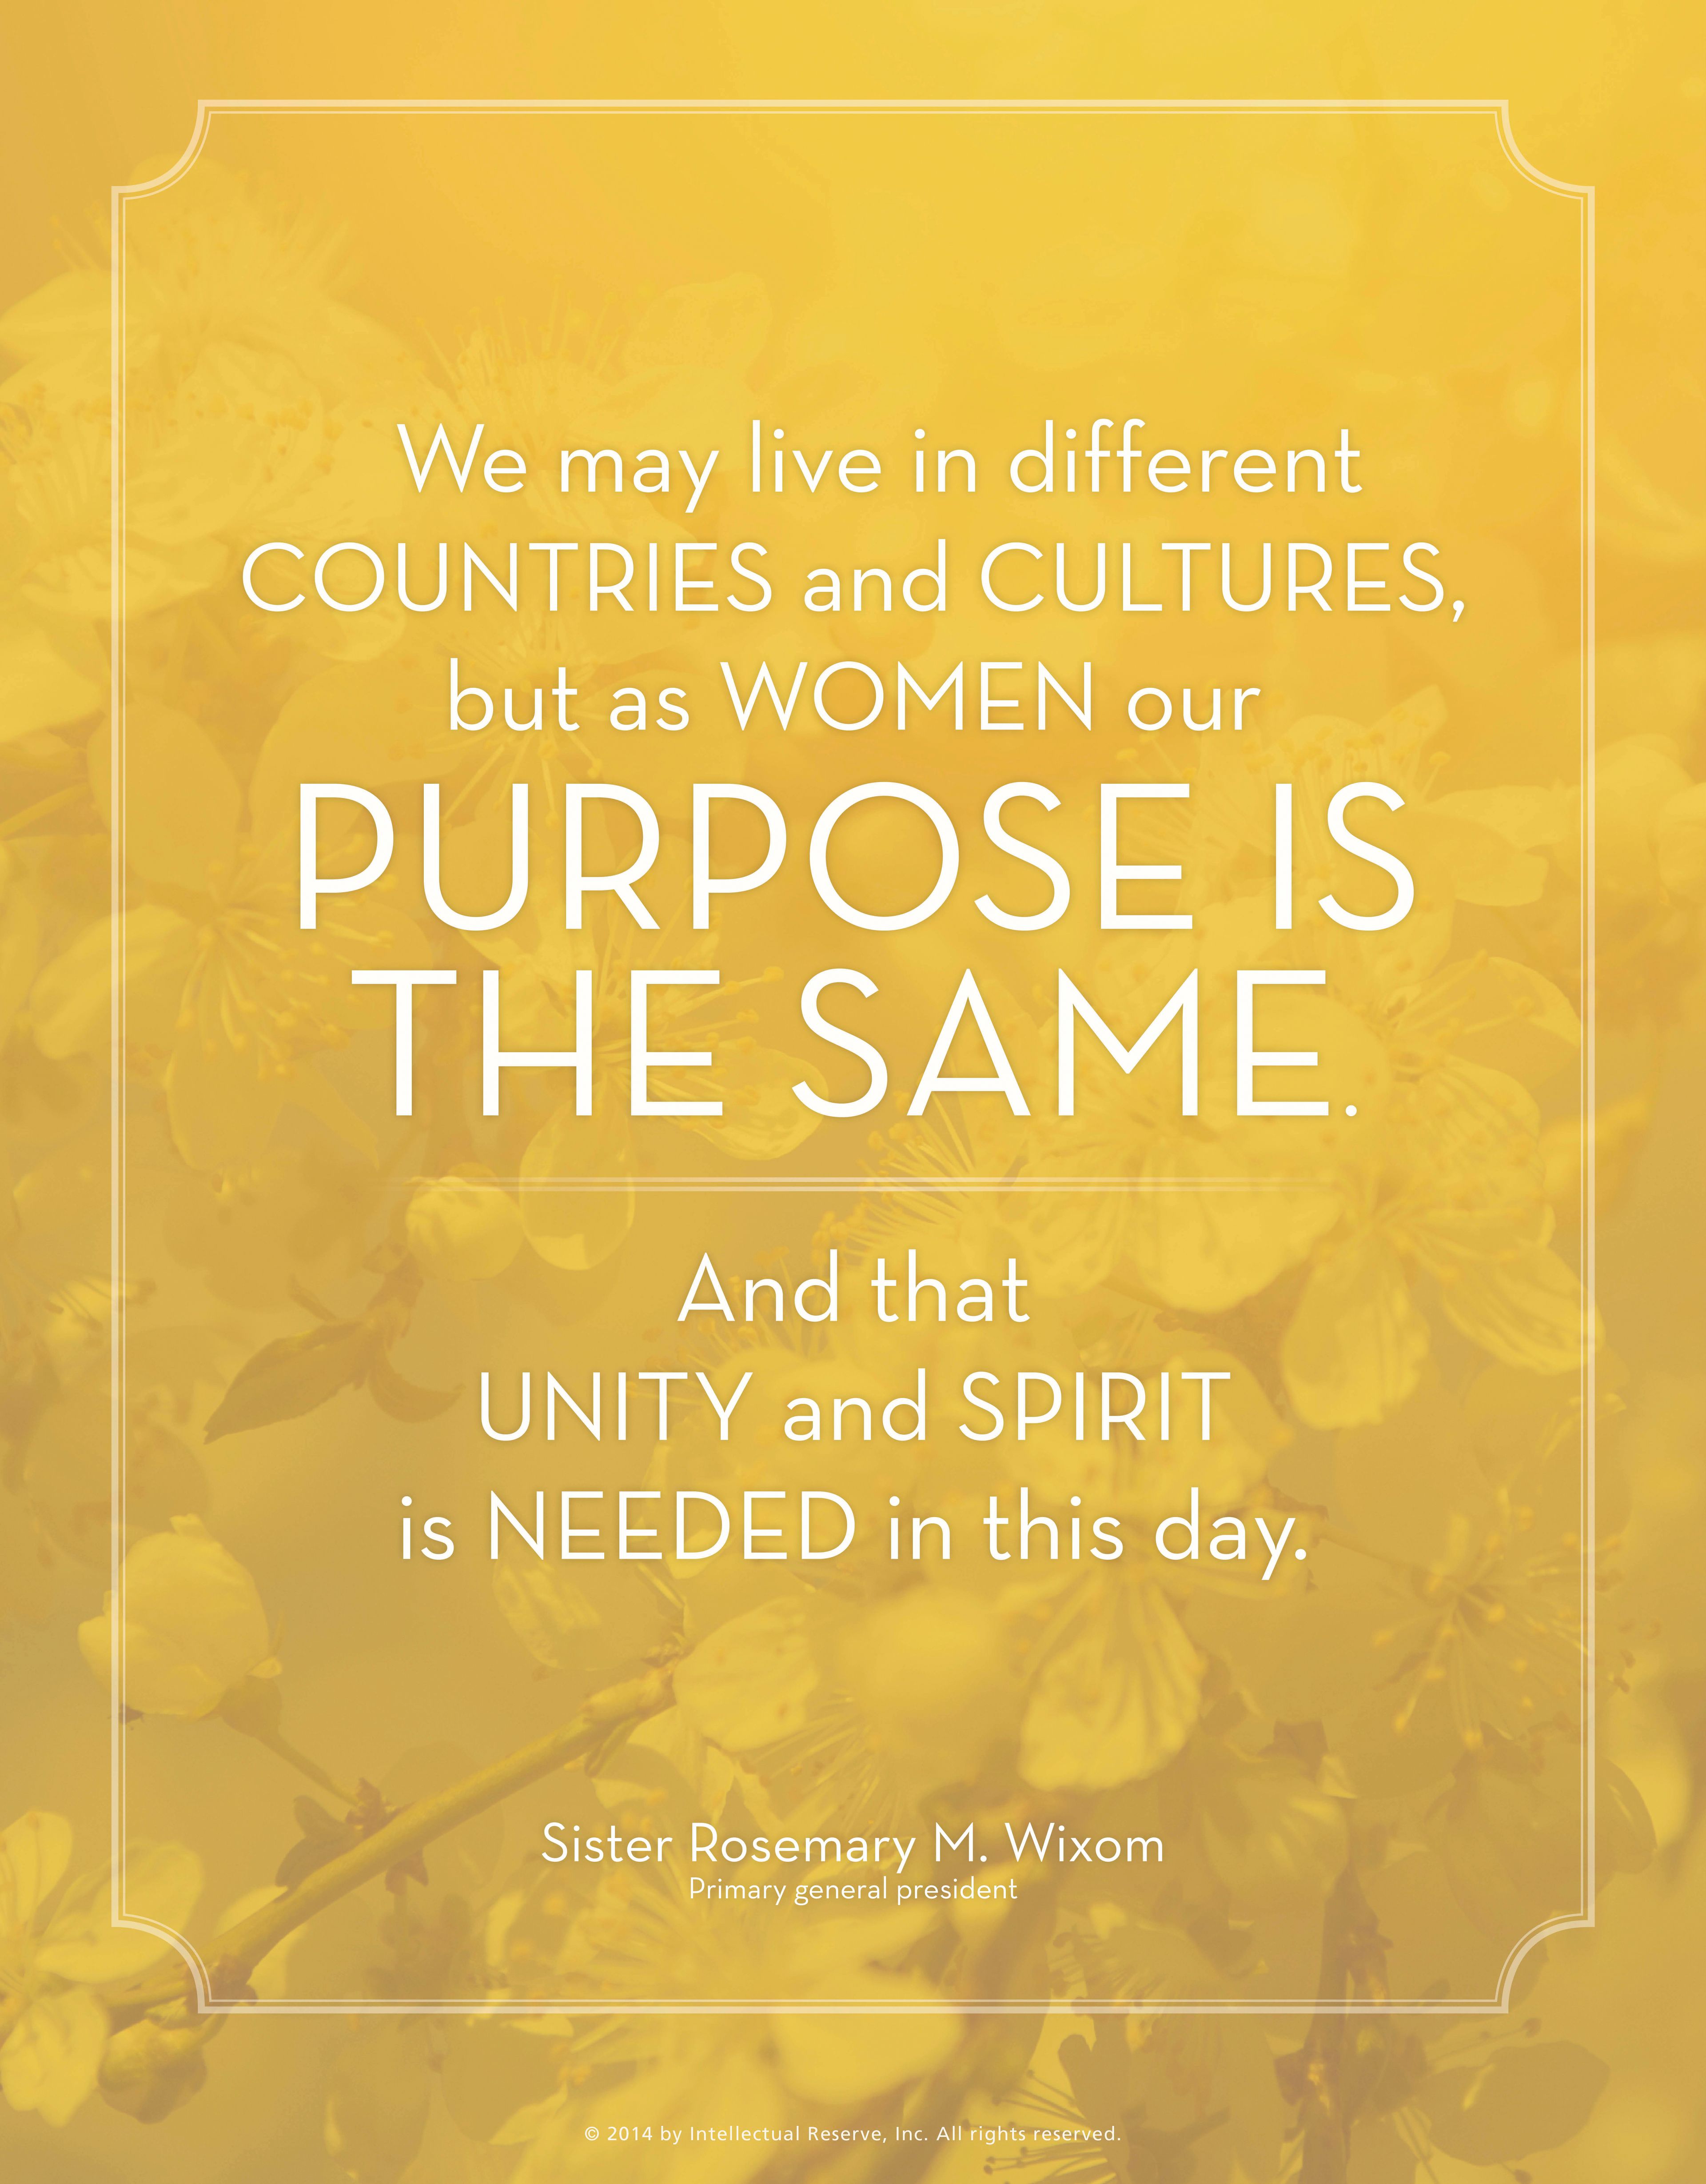 “We may live in different countries and cultures, but as women our purpose is the same. And that unity and spirit is needed in this day.”—Sister Rosemary M. Wixom, “A Conversation with the R.S., Y.W., and Primary Presidents”